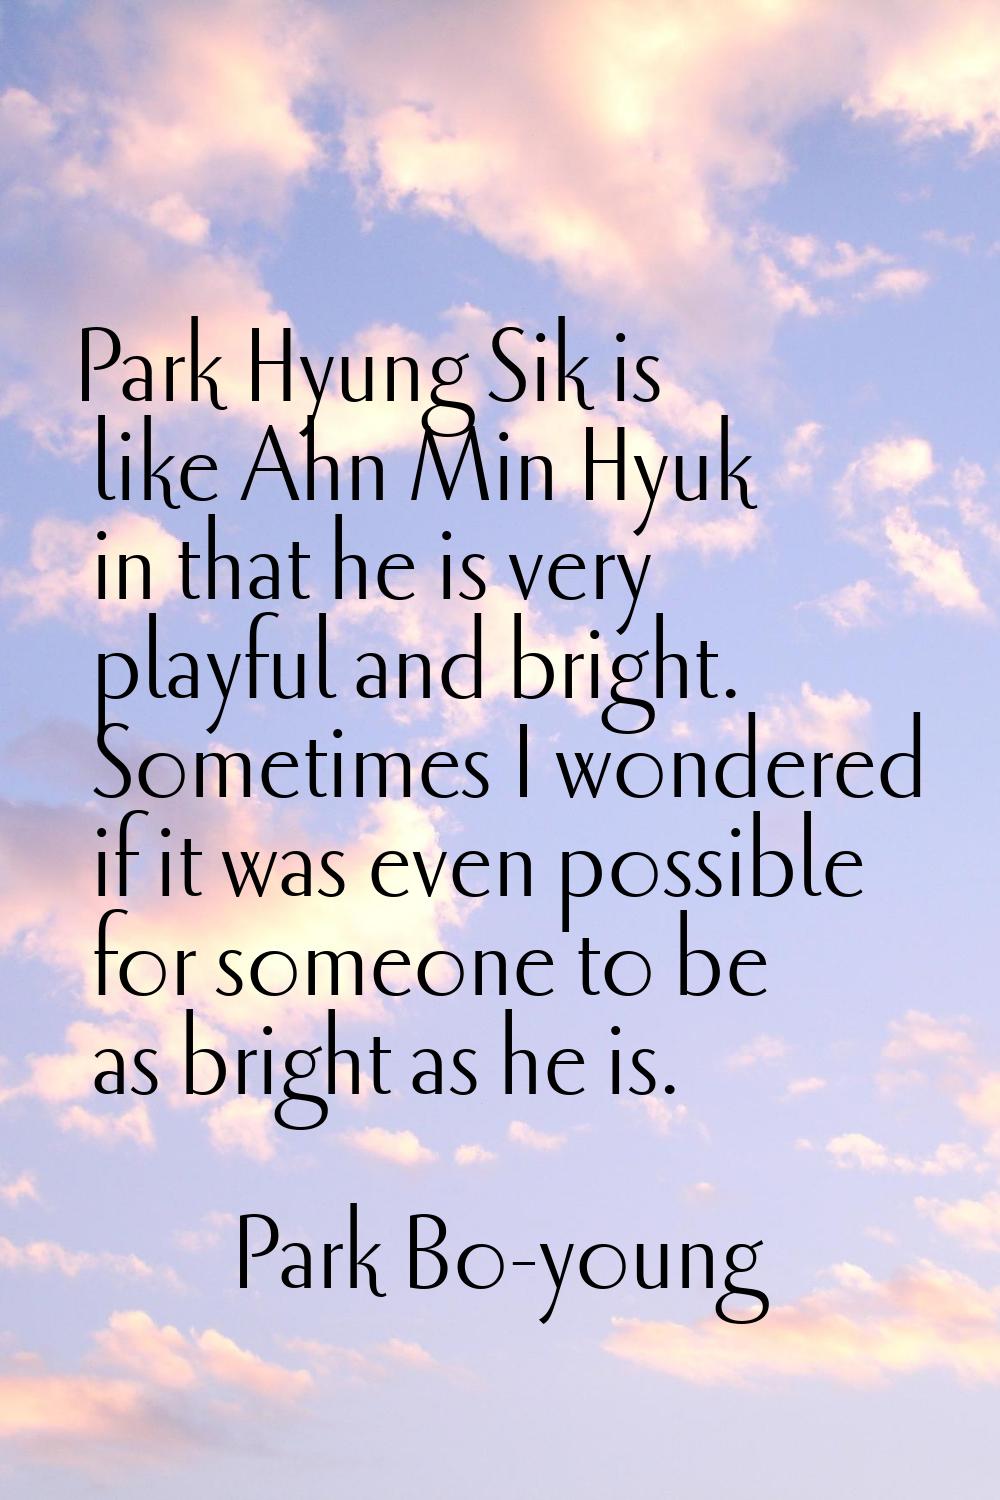 Park Hyung Sik is like Ahn Min Hyuk in that he is very playful and bright. Sometimes I wondered if 